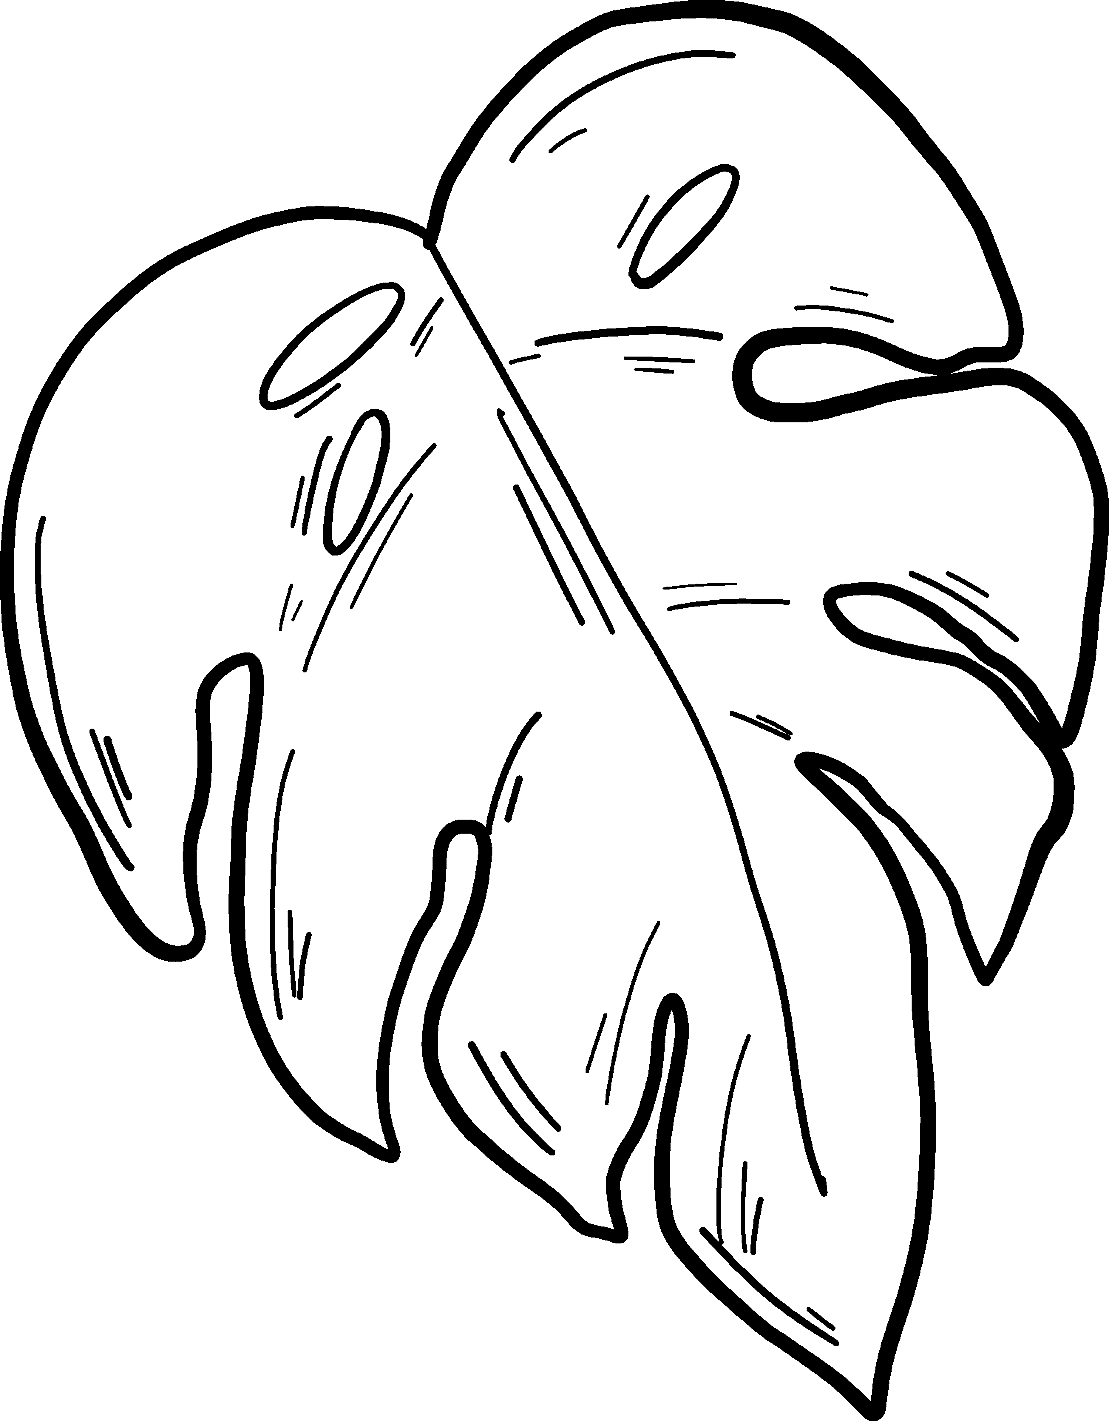 jungle leaf coloring page